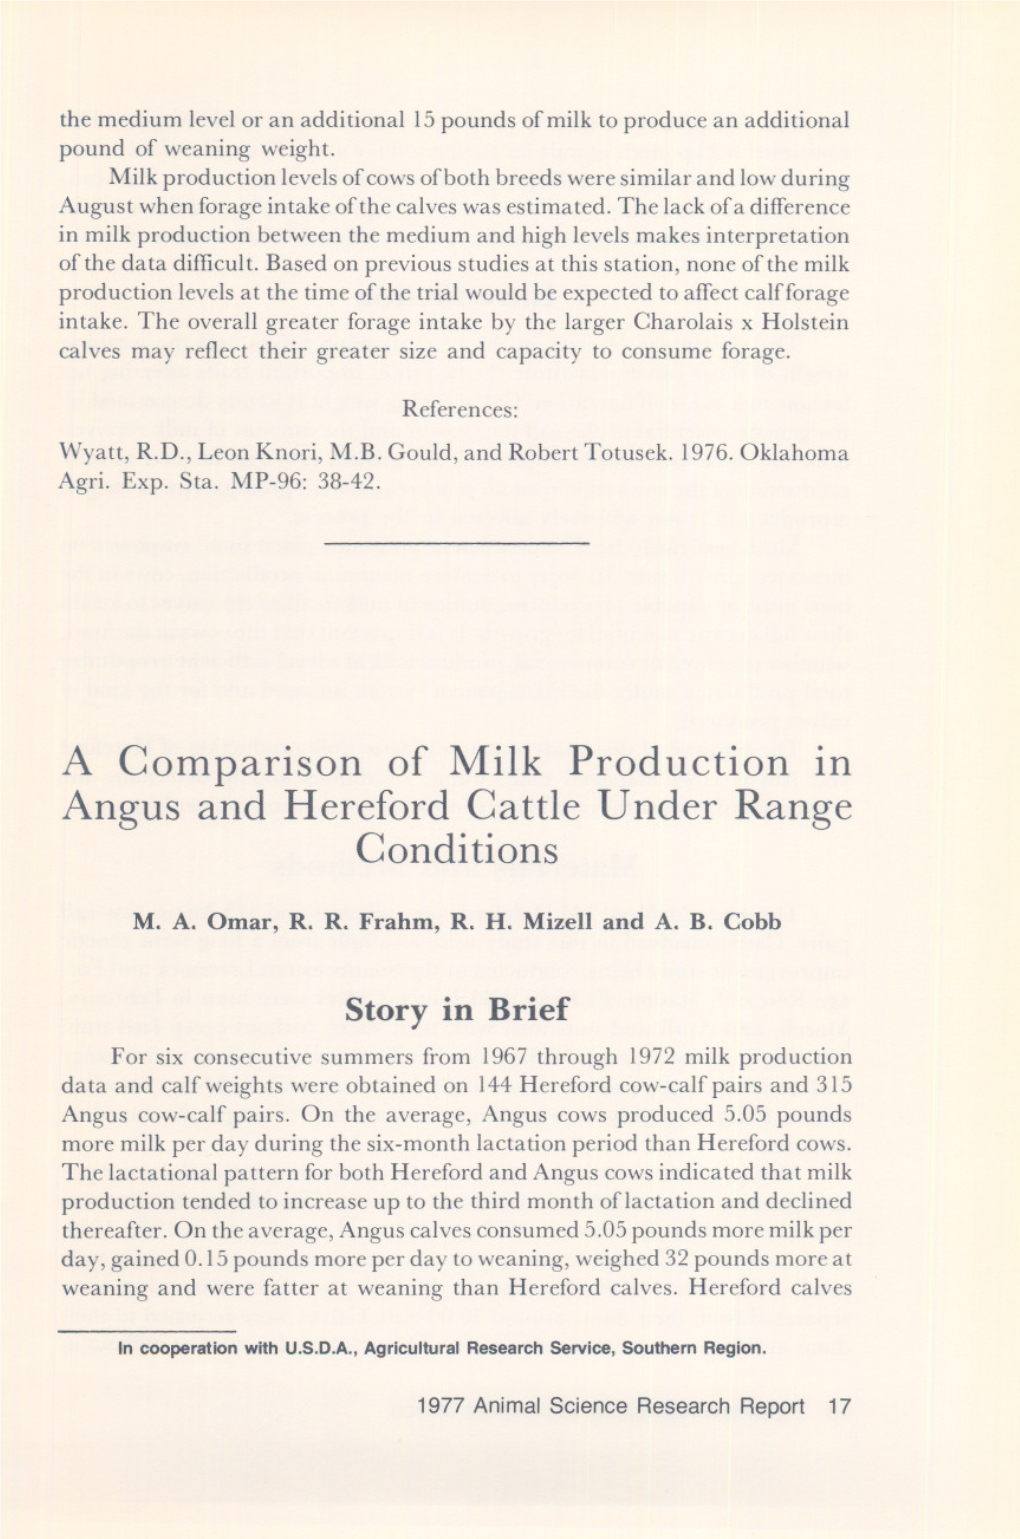 A Comparison of Milk Production in Angus and Hereford Cattle Under Range Condi Tions